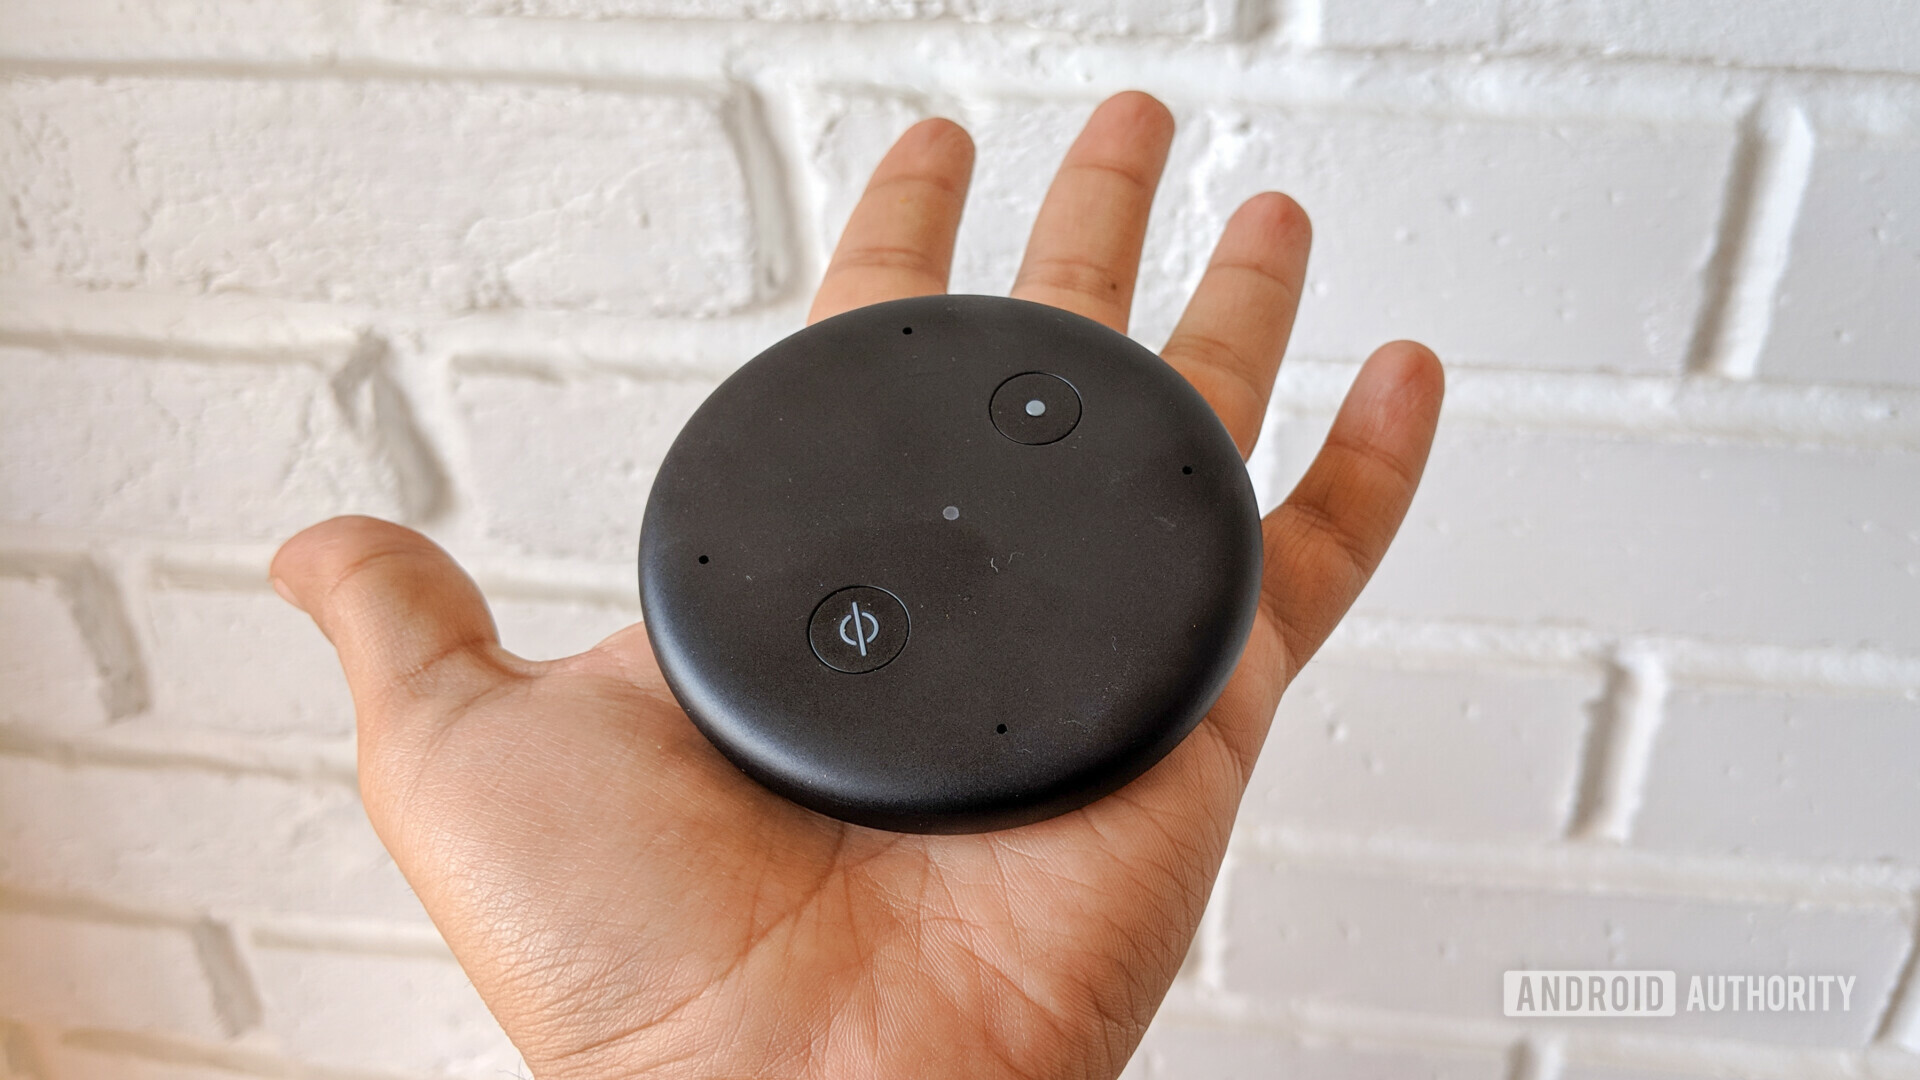 Photo of the Amazon Echo Input held in a hand for size comparion.